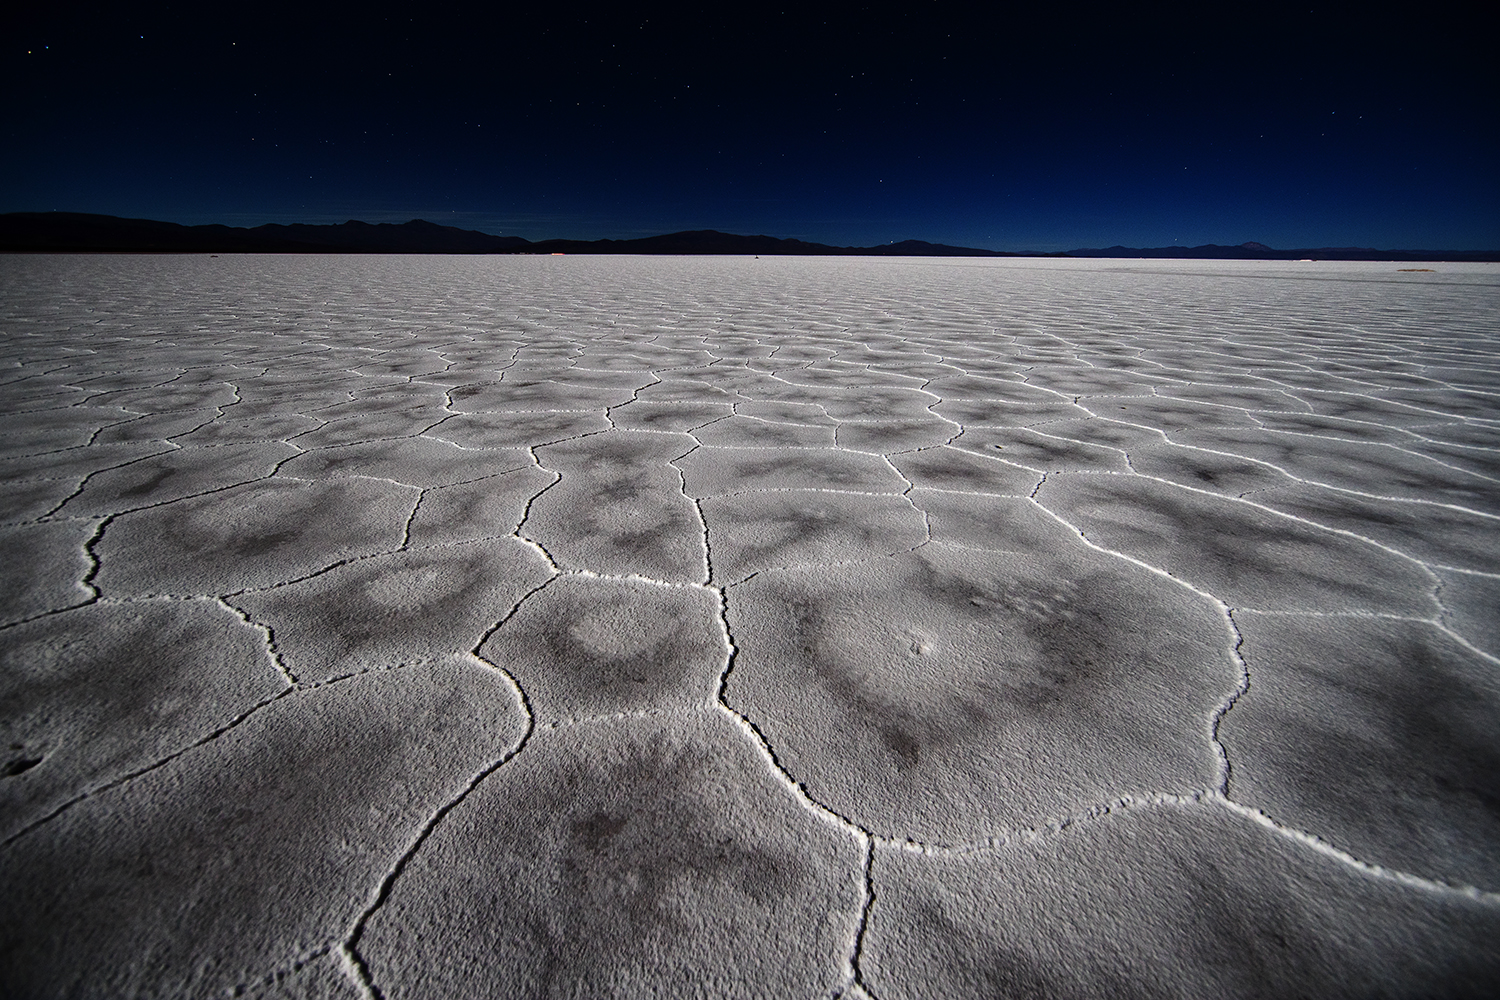 Altiplano 17, Gallery 7 – On the way to Chile. Salt lakes and Vicunas.